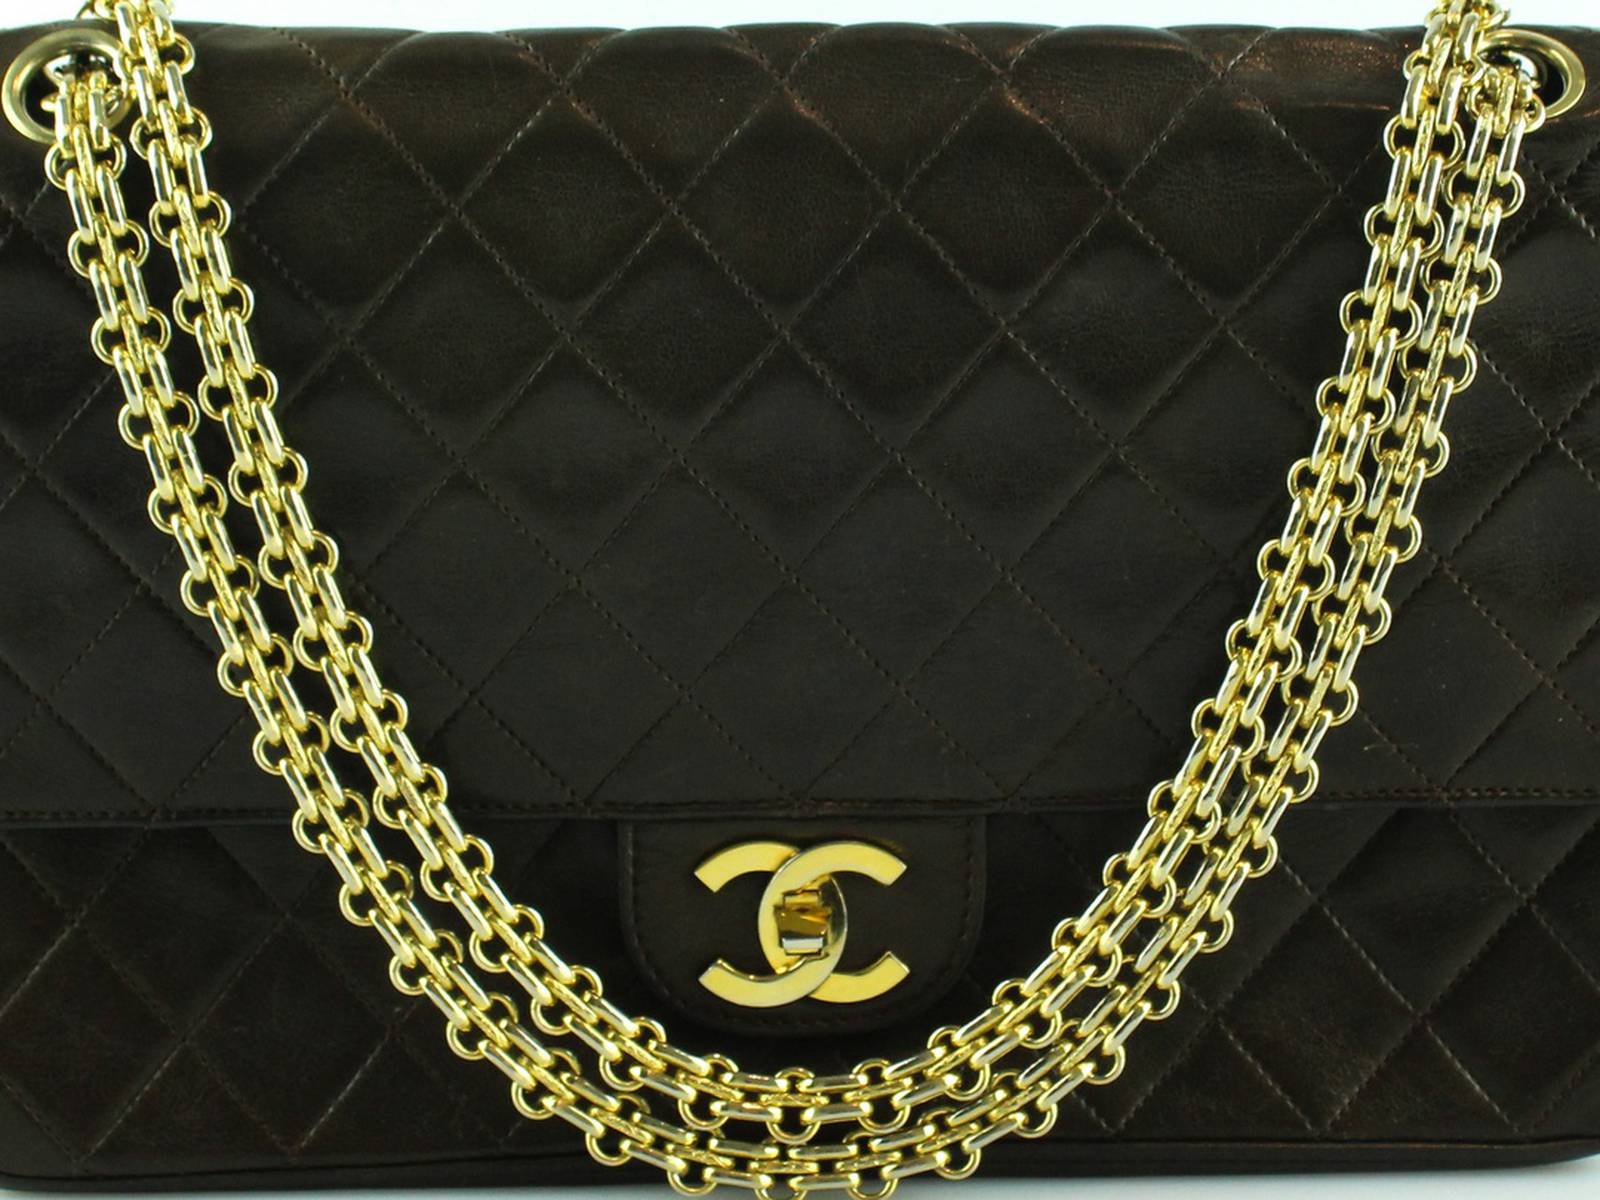 How To Buy A Classic Chanel Bag